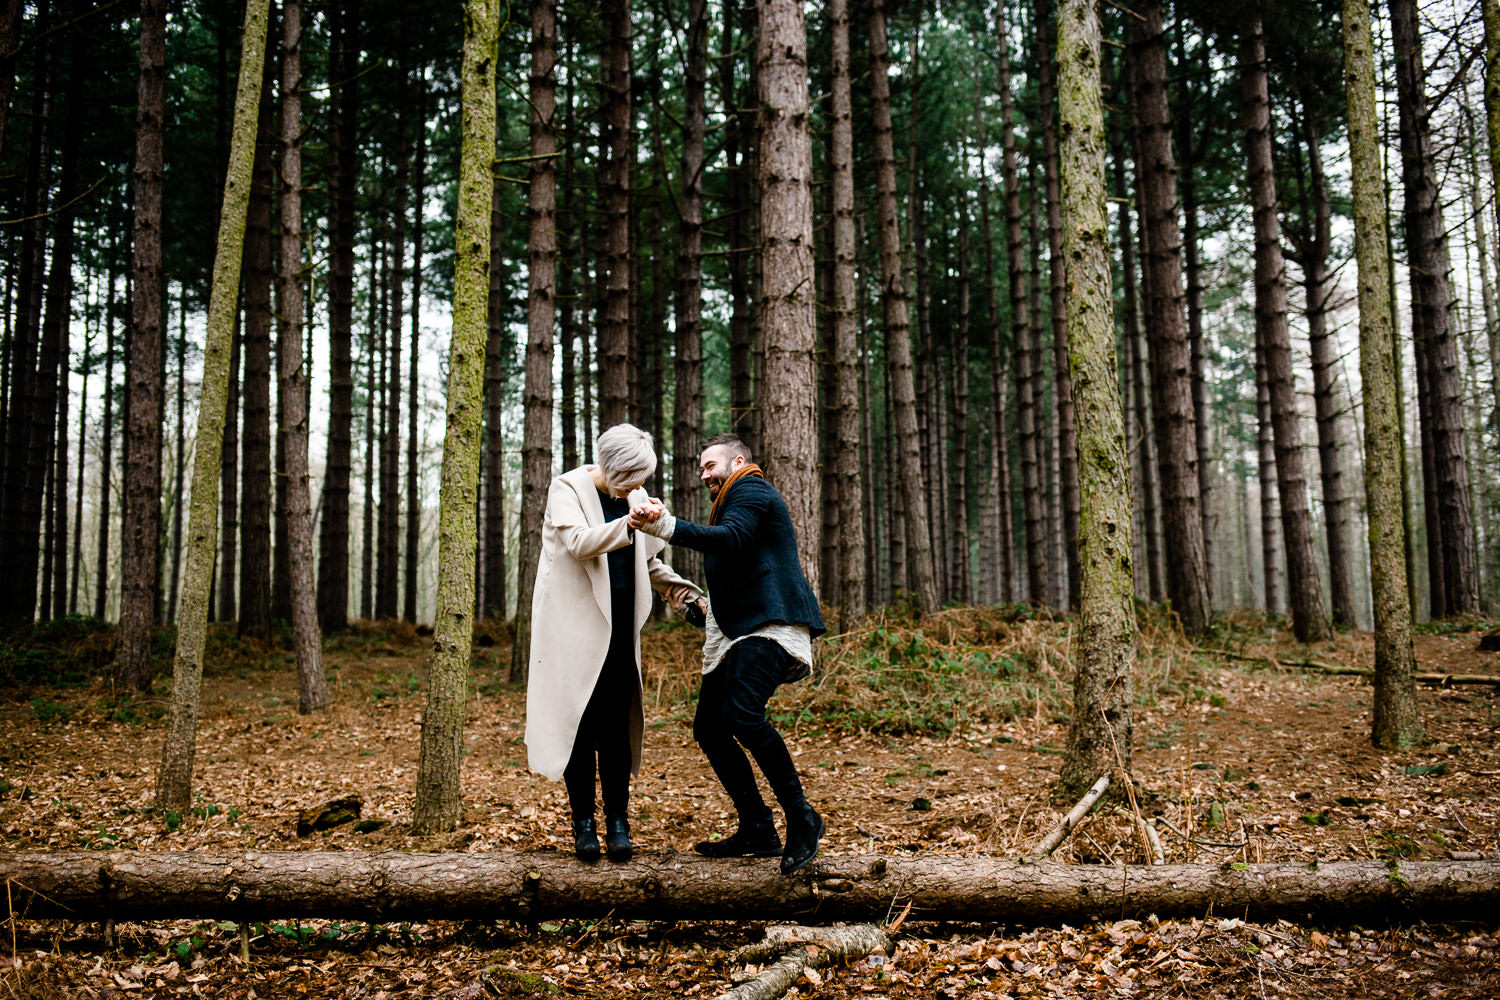 A couple having fun balancing on a log in a Yorkshire pine tree woodland